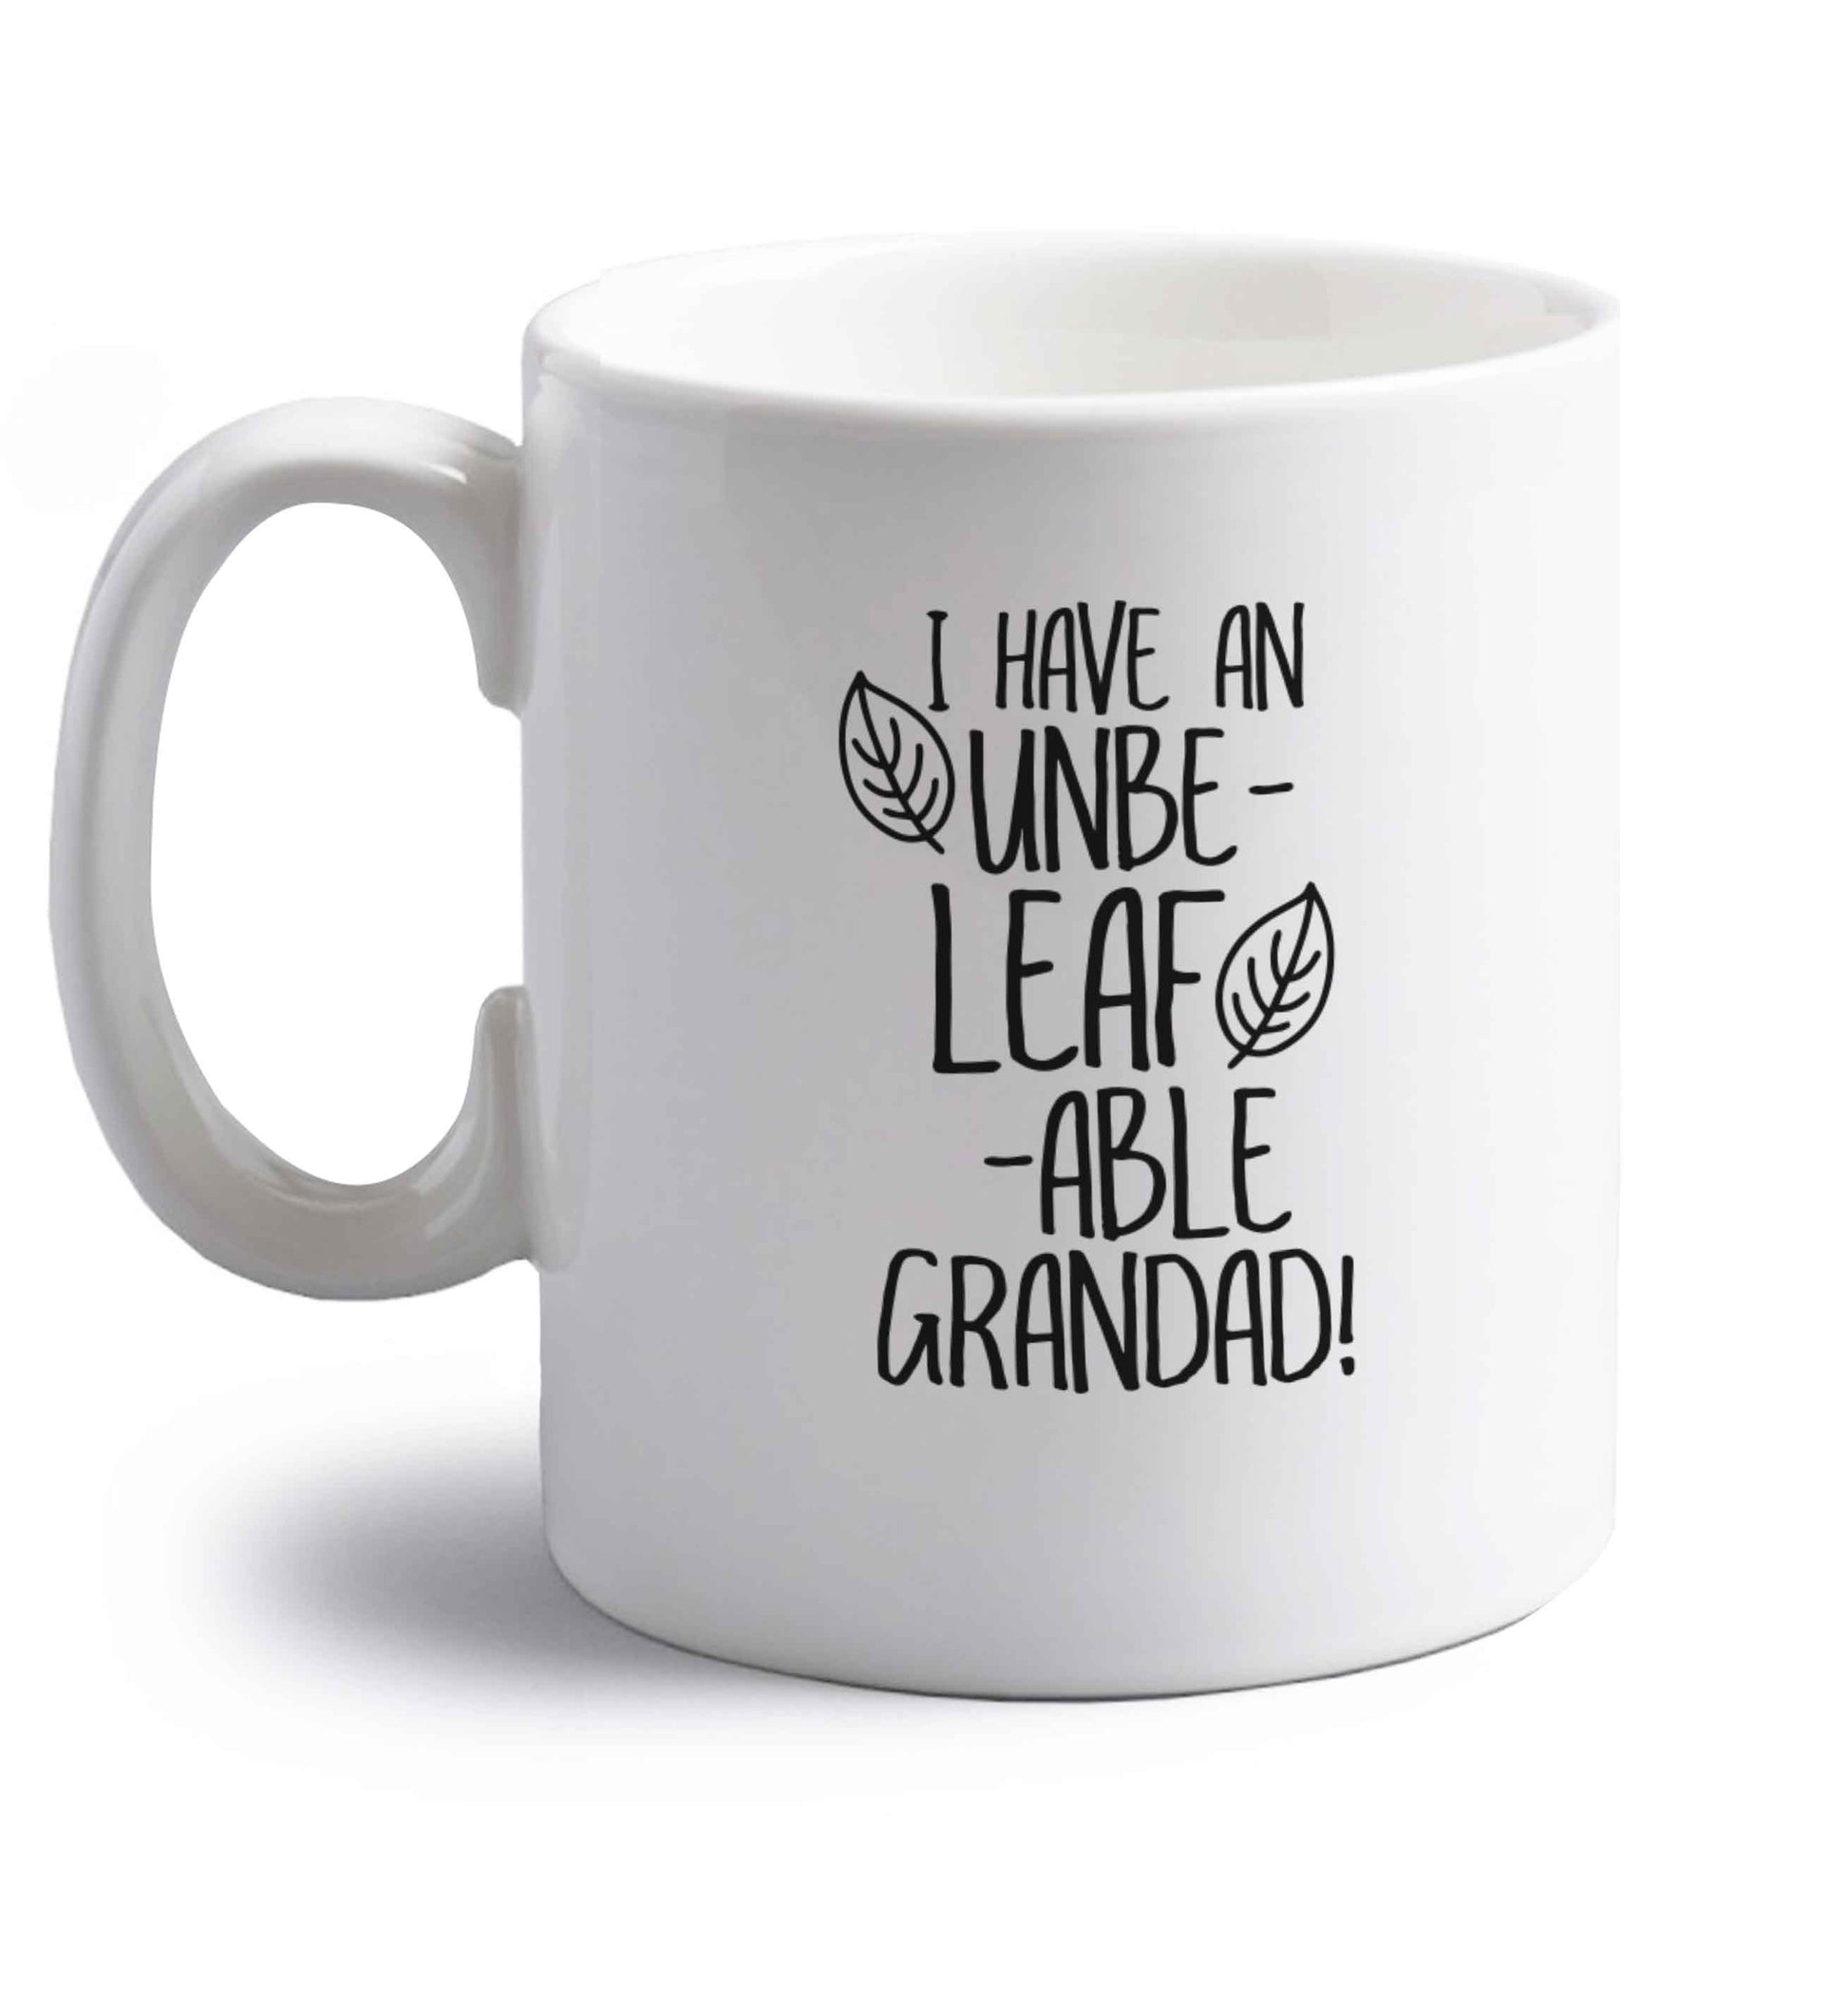 I have an unbe-leaf-able grandad right handed white ceramic mug 